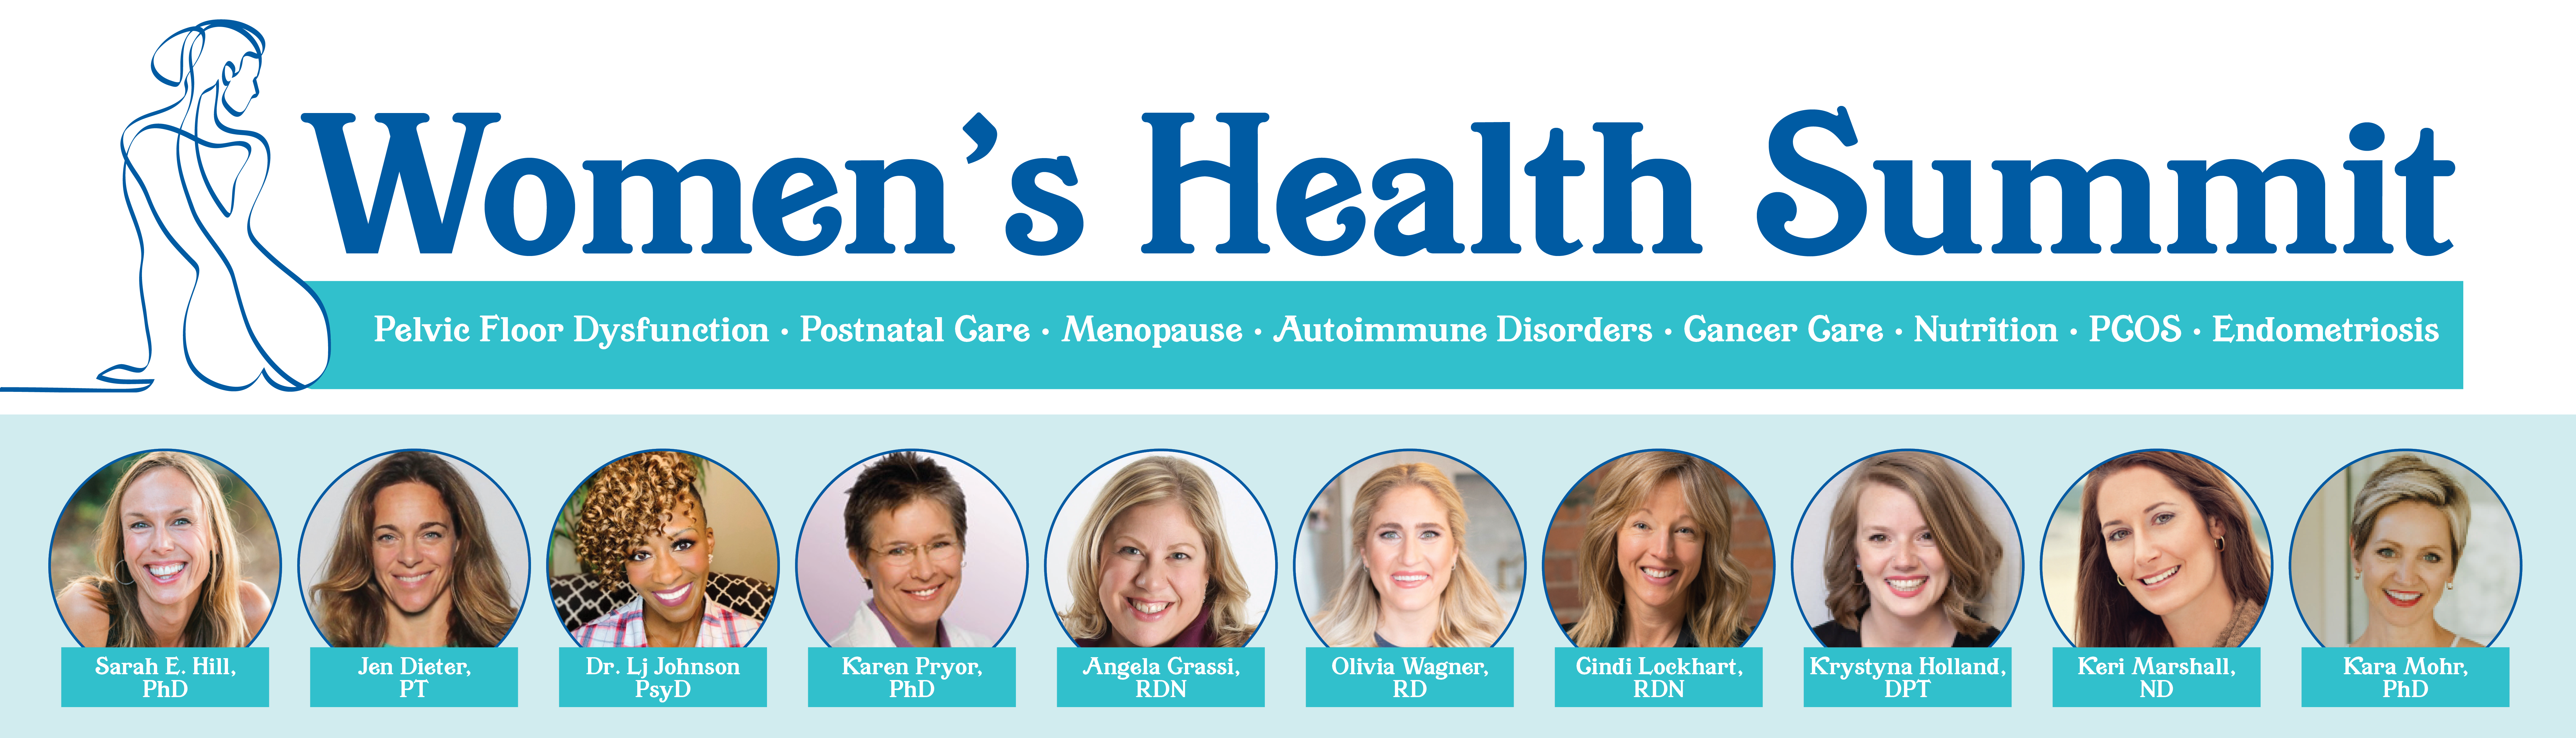 Women’s Health Summit: Clinical Solutions for Healthcare Professionals